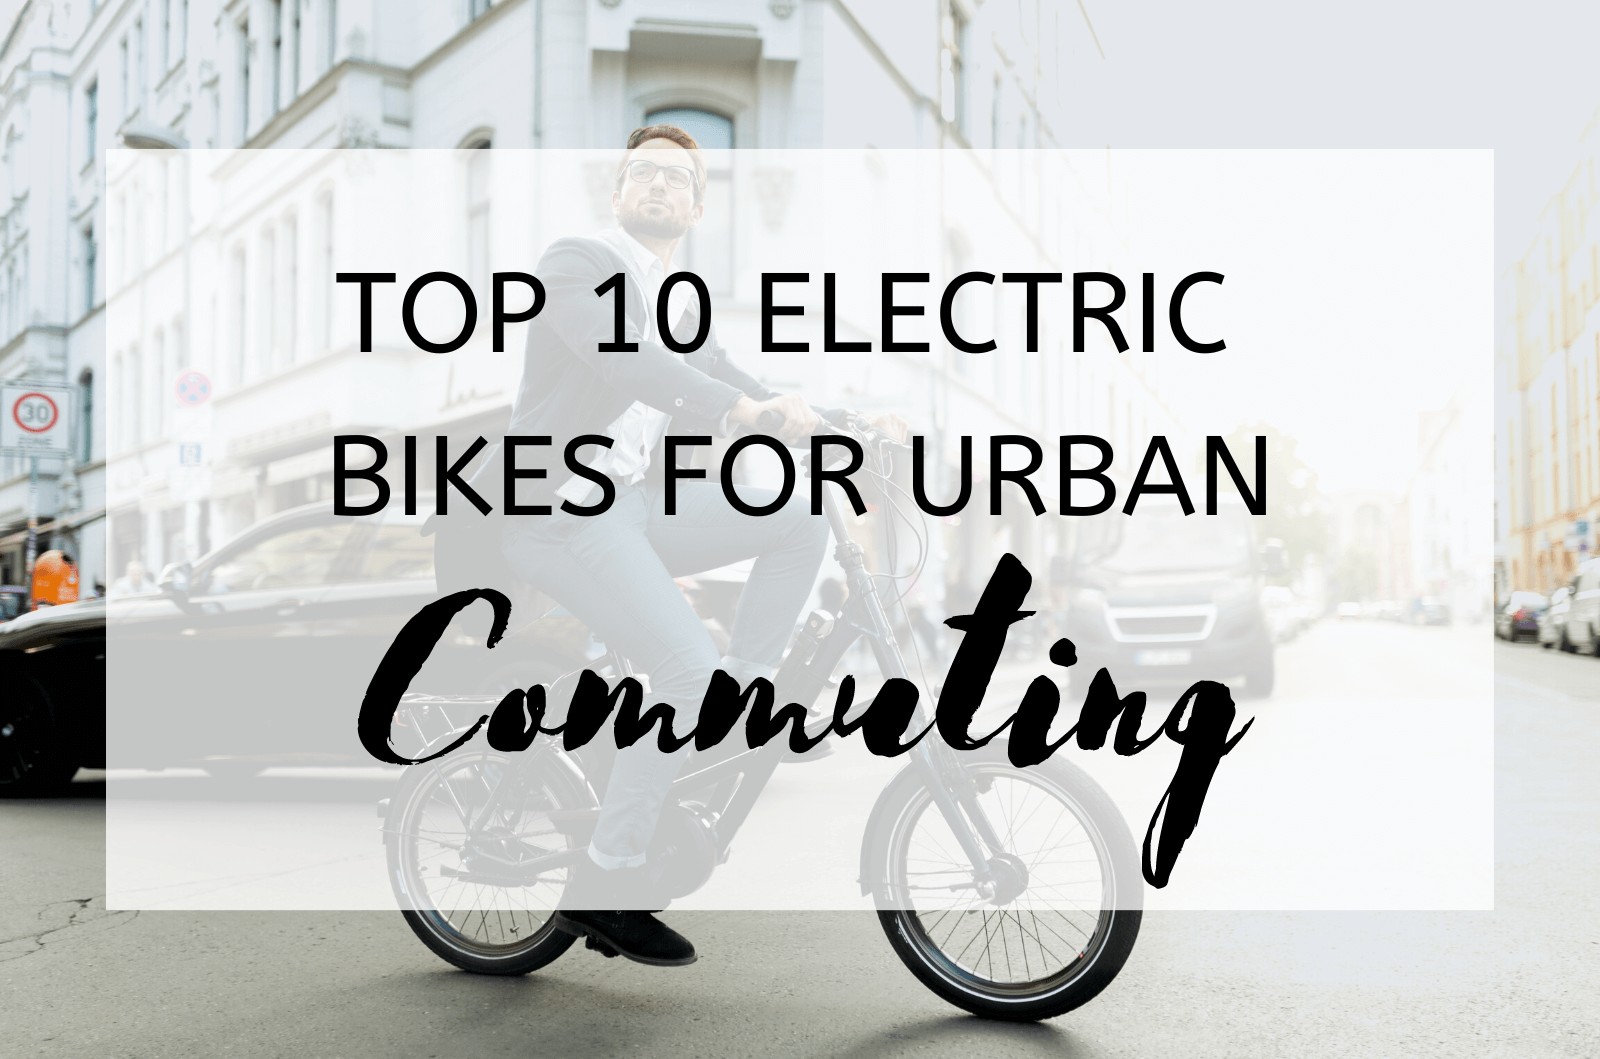 Top 10 Electric Bikes For Urban Commuting